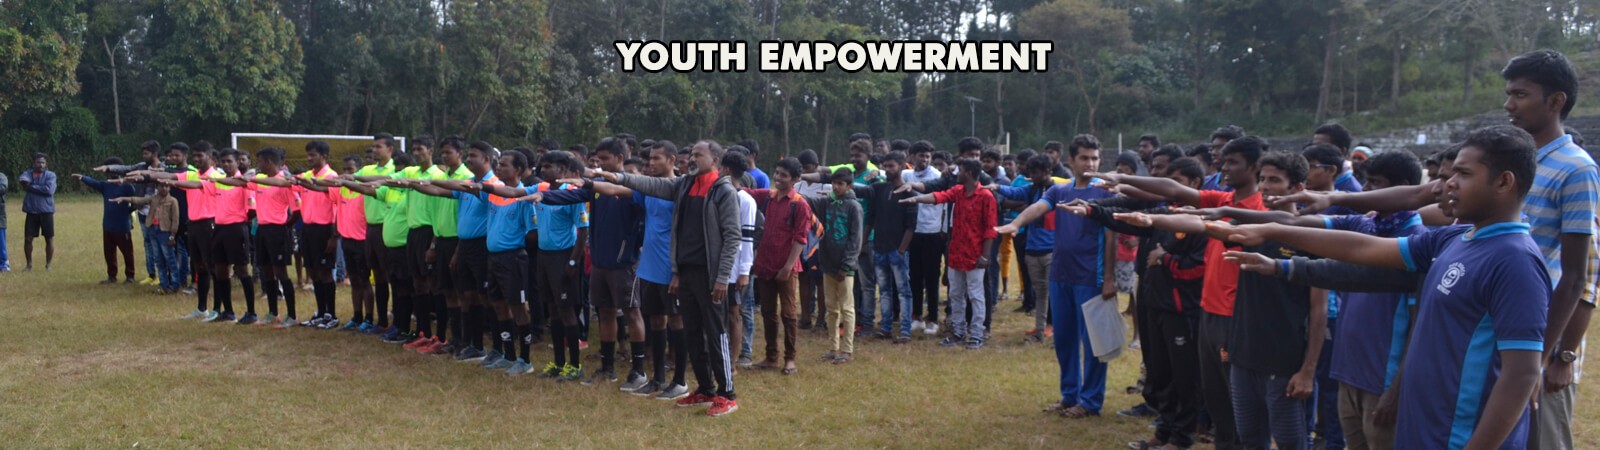 youth empowerment 1